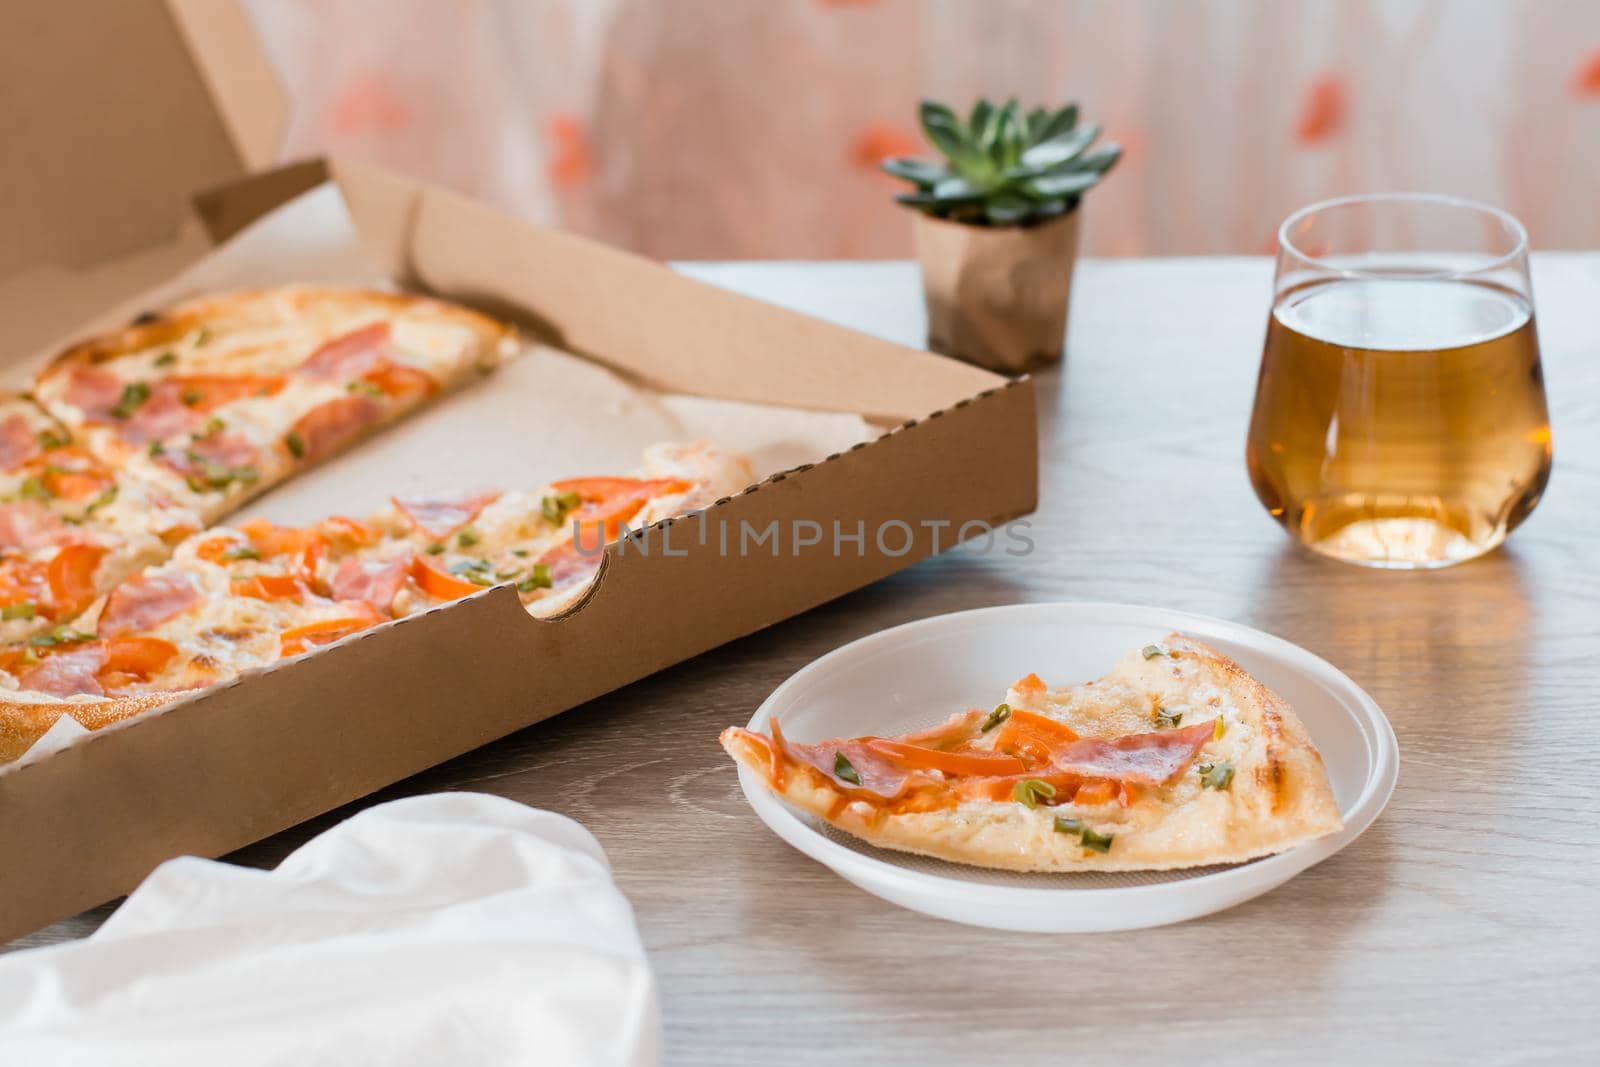 Takeout food. A slice of pizza in a disposable plastic plate, beer and a box of pizza on the table in the kitchen. by Aleruana